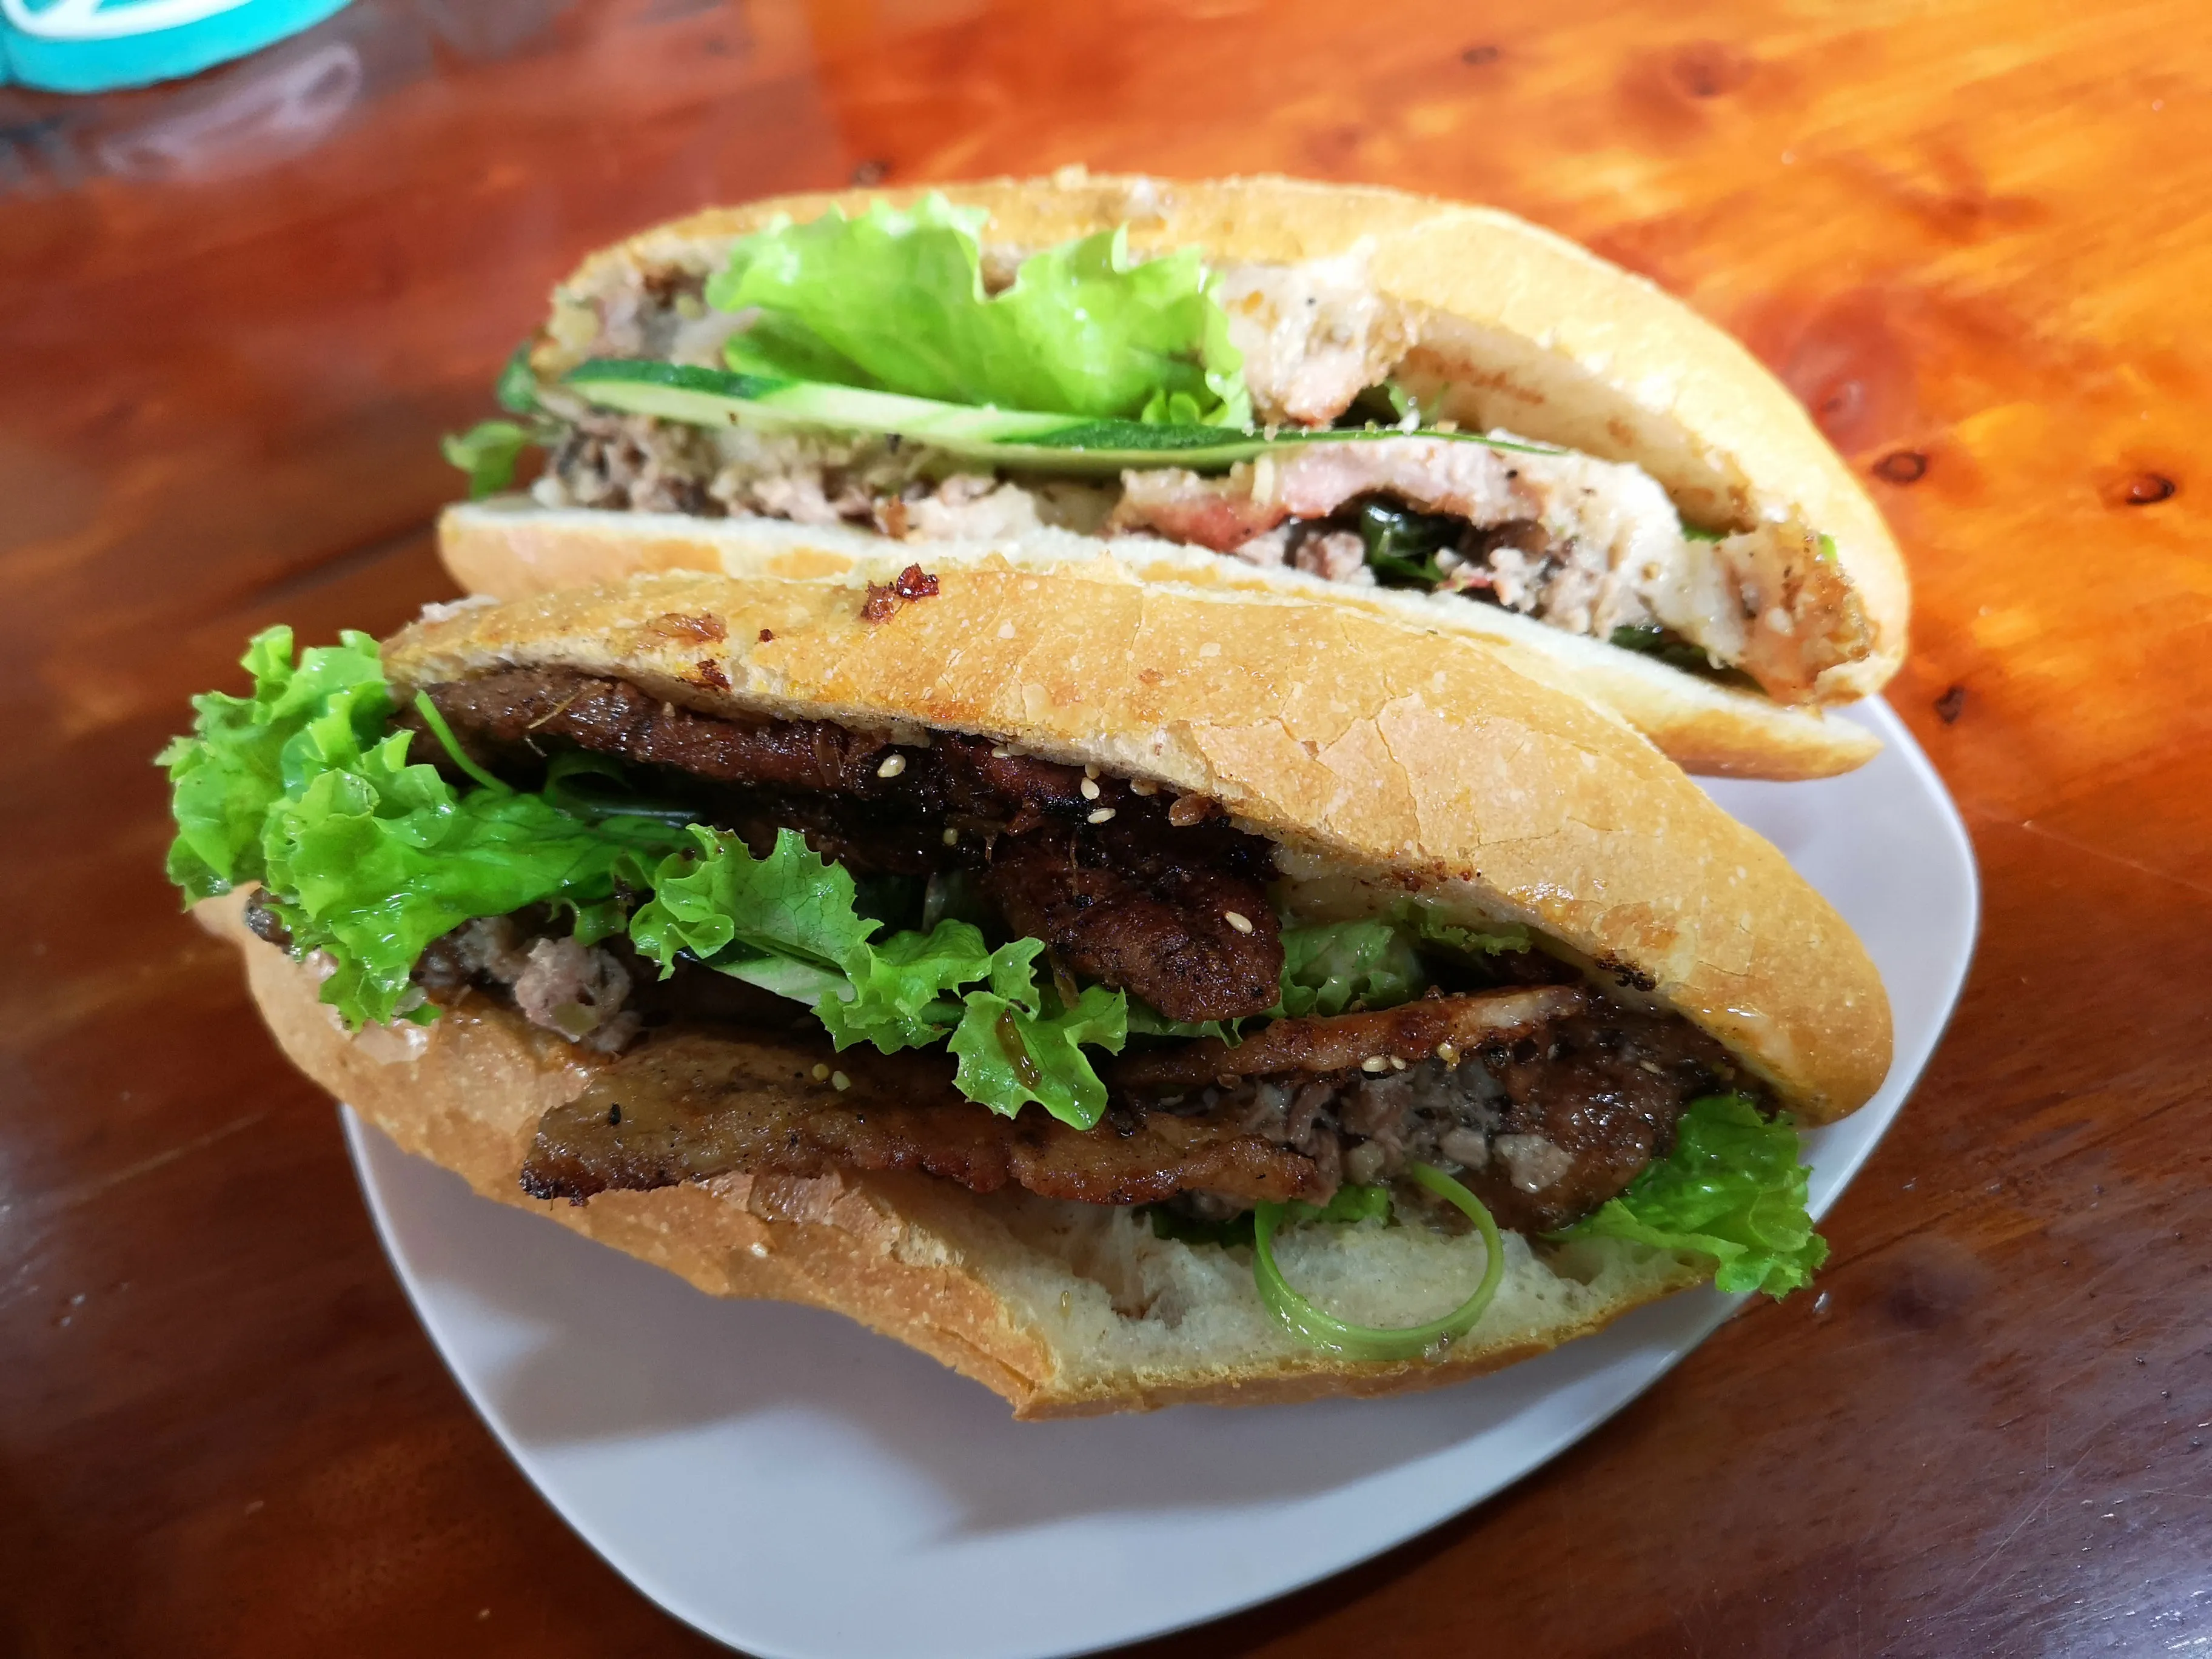 The grilled pork and bbq pork banh mi sandwiches at Banh Mi Phuong.